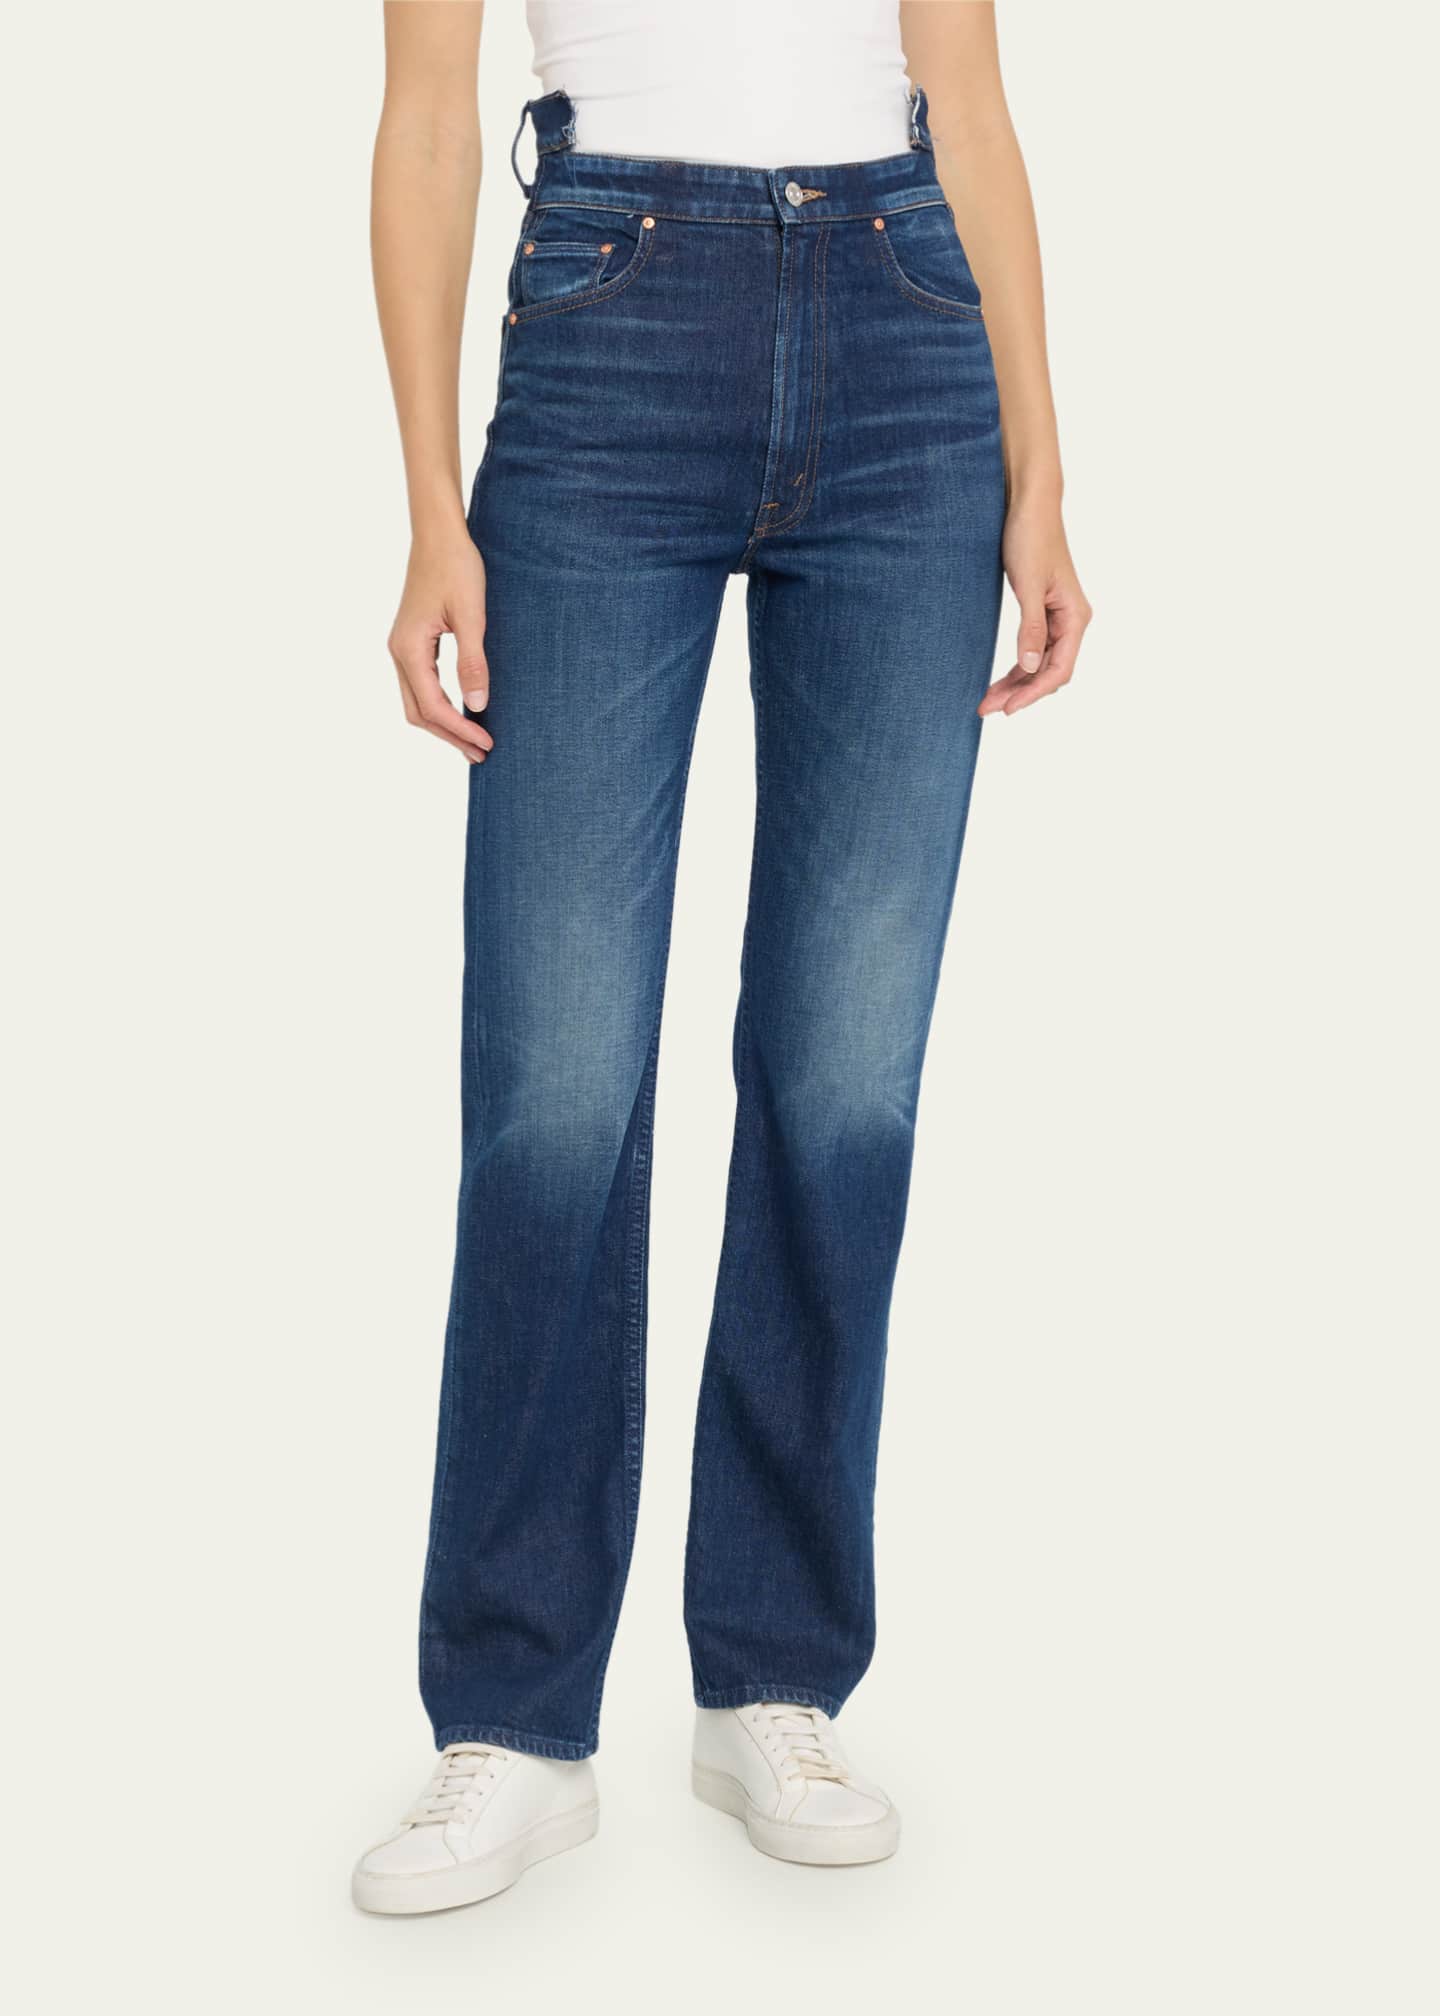 MOTHER The High Waisted Rider Shift Sneak Jeans - Bergdorf Goodman